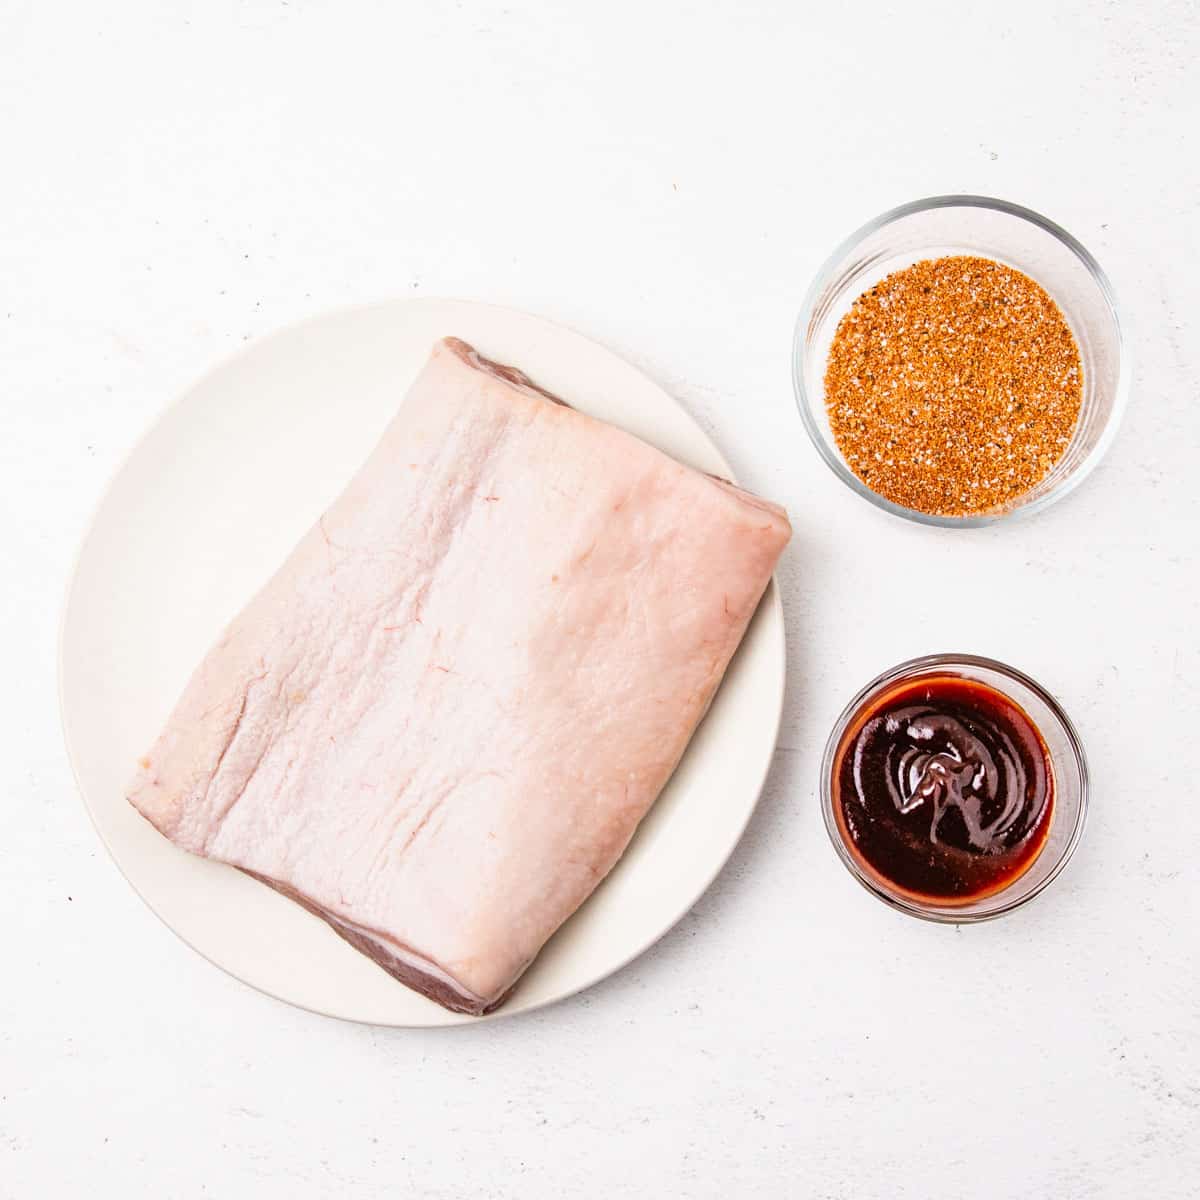 Small bowls of barbecue rub and barbecue sauce next to a slab of pork belly on a plate. 